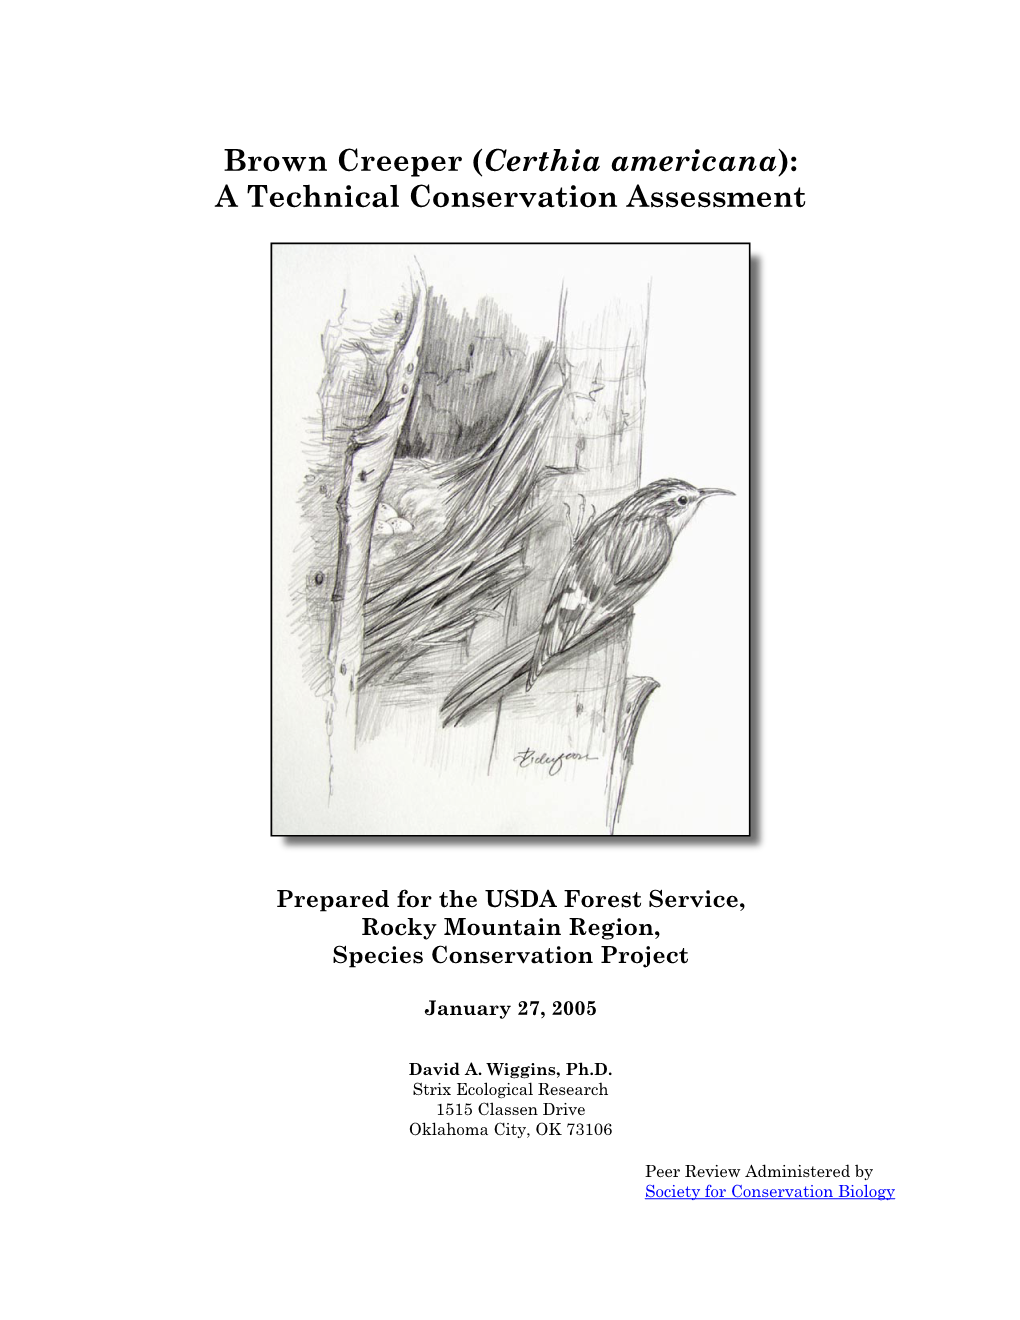 Brown Creeper (Certhia Americana): a Technical Conservation Assessment